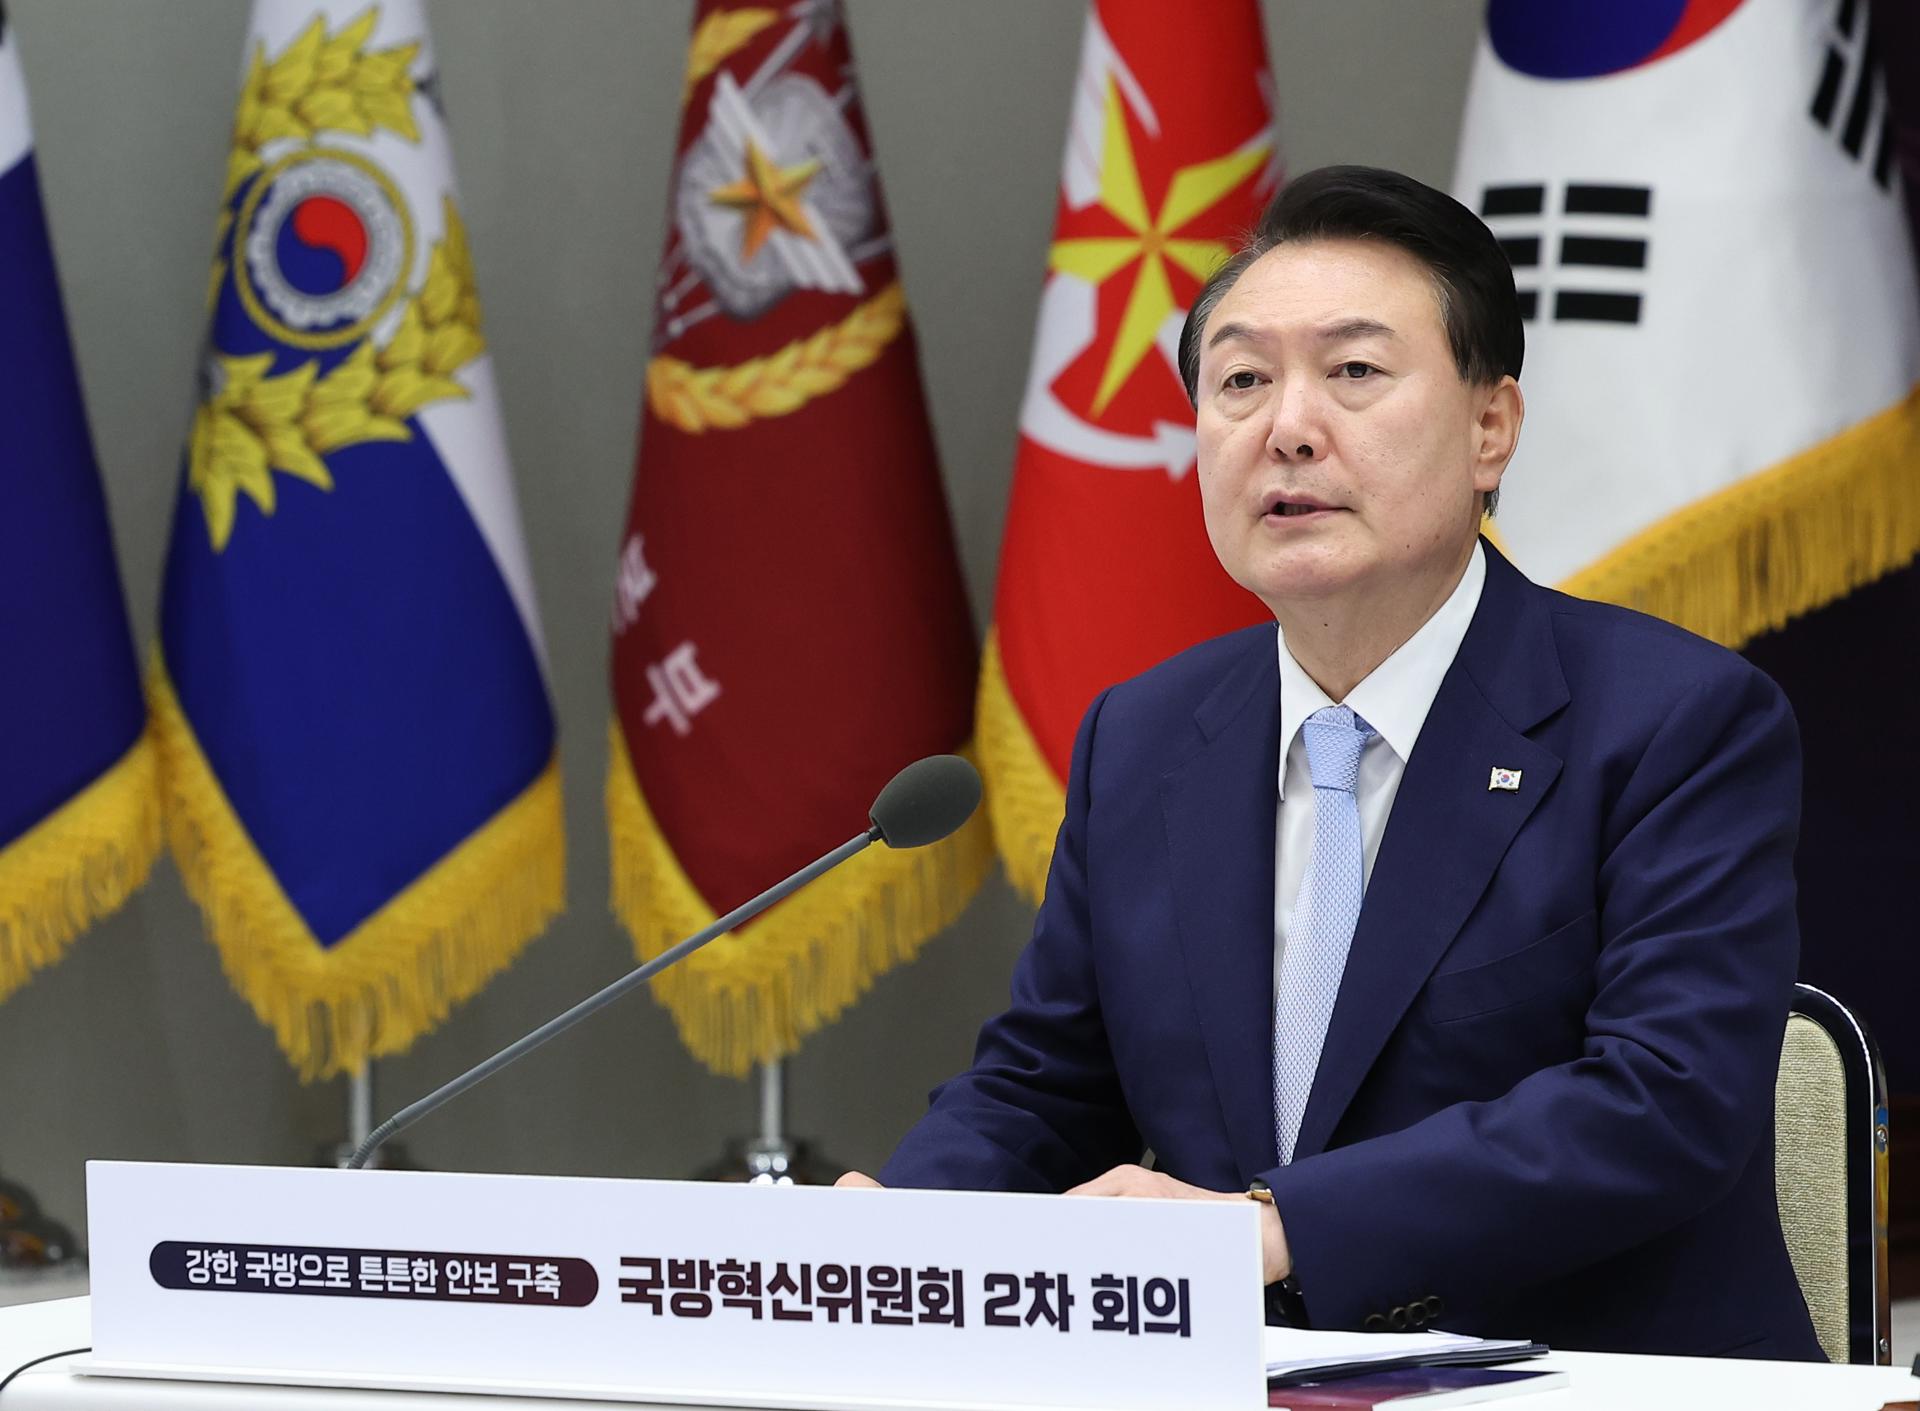 South Korea's President Yoon Suk Yeol speaks at the presidential office during the second meeting of the Defense Innovation Committee, in Seoul, 08 August 2023. EFE/EPA/FILE/YONHAP SOUTH KOREA OUT